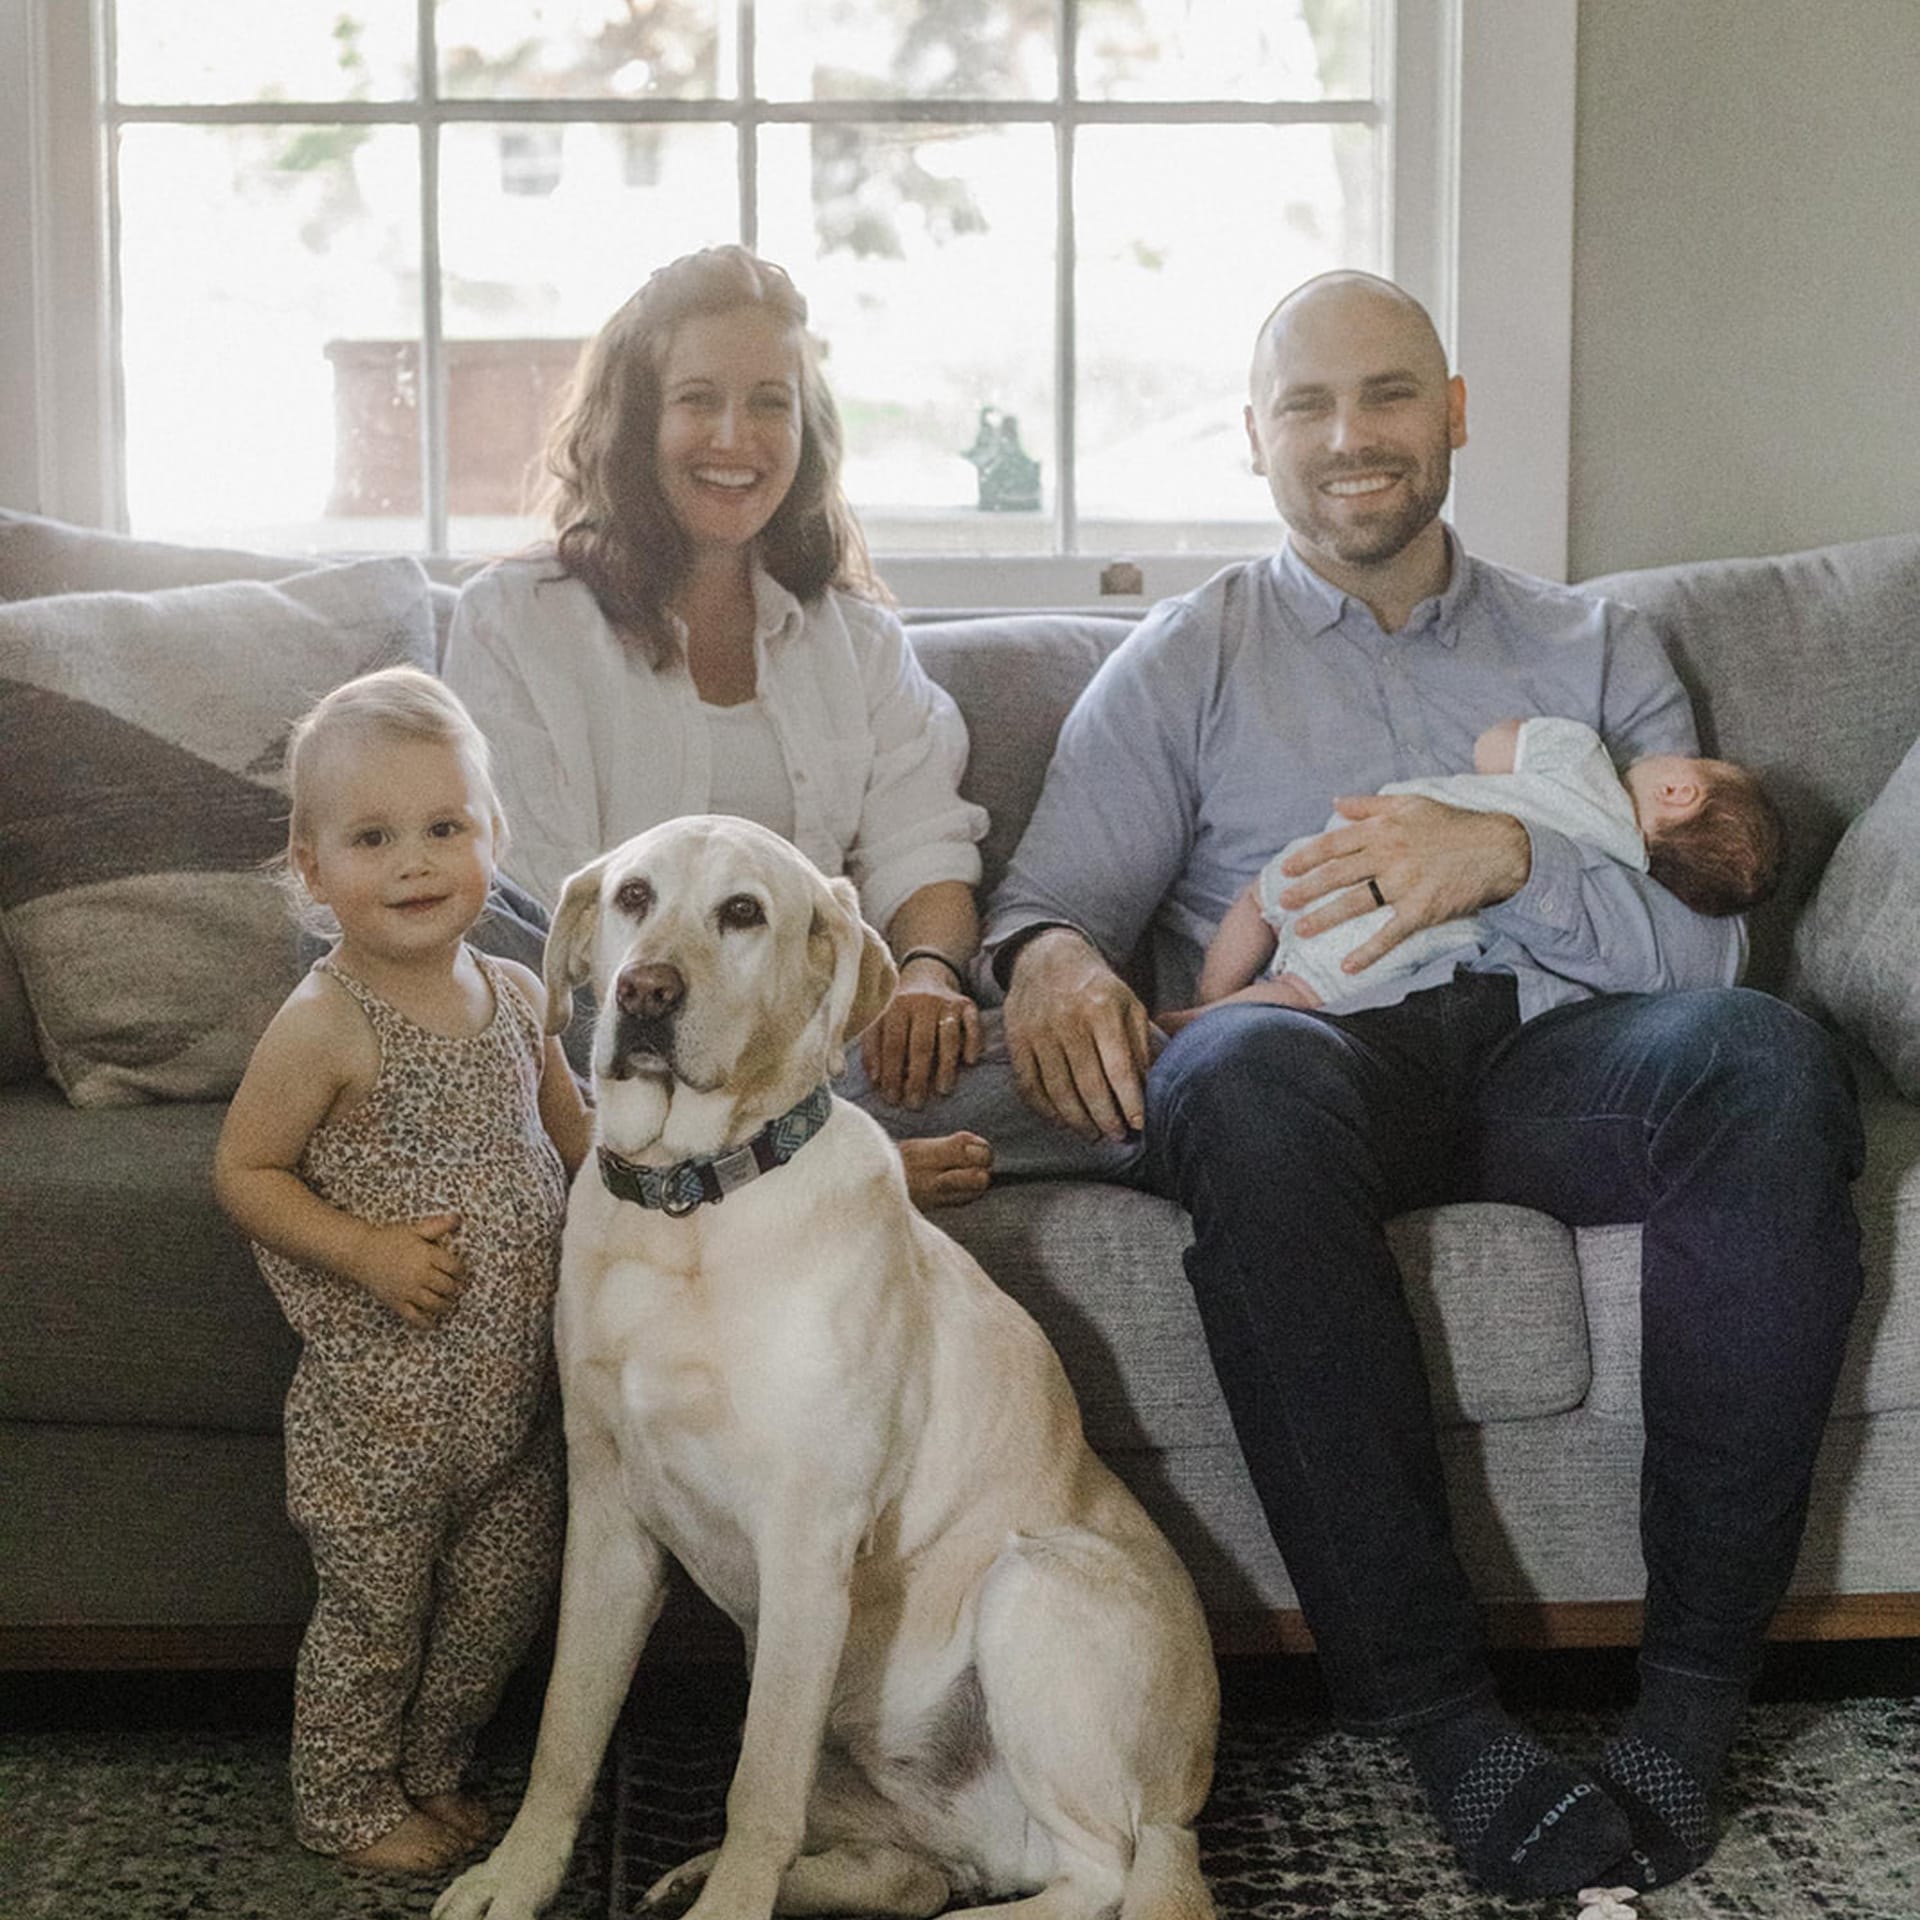 Jeff Levine and Family, Including Partner, Baby, Toddler, and Dog